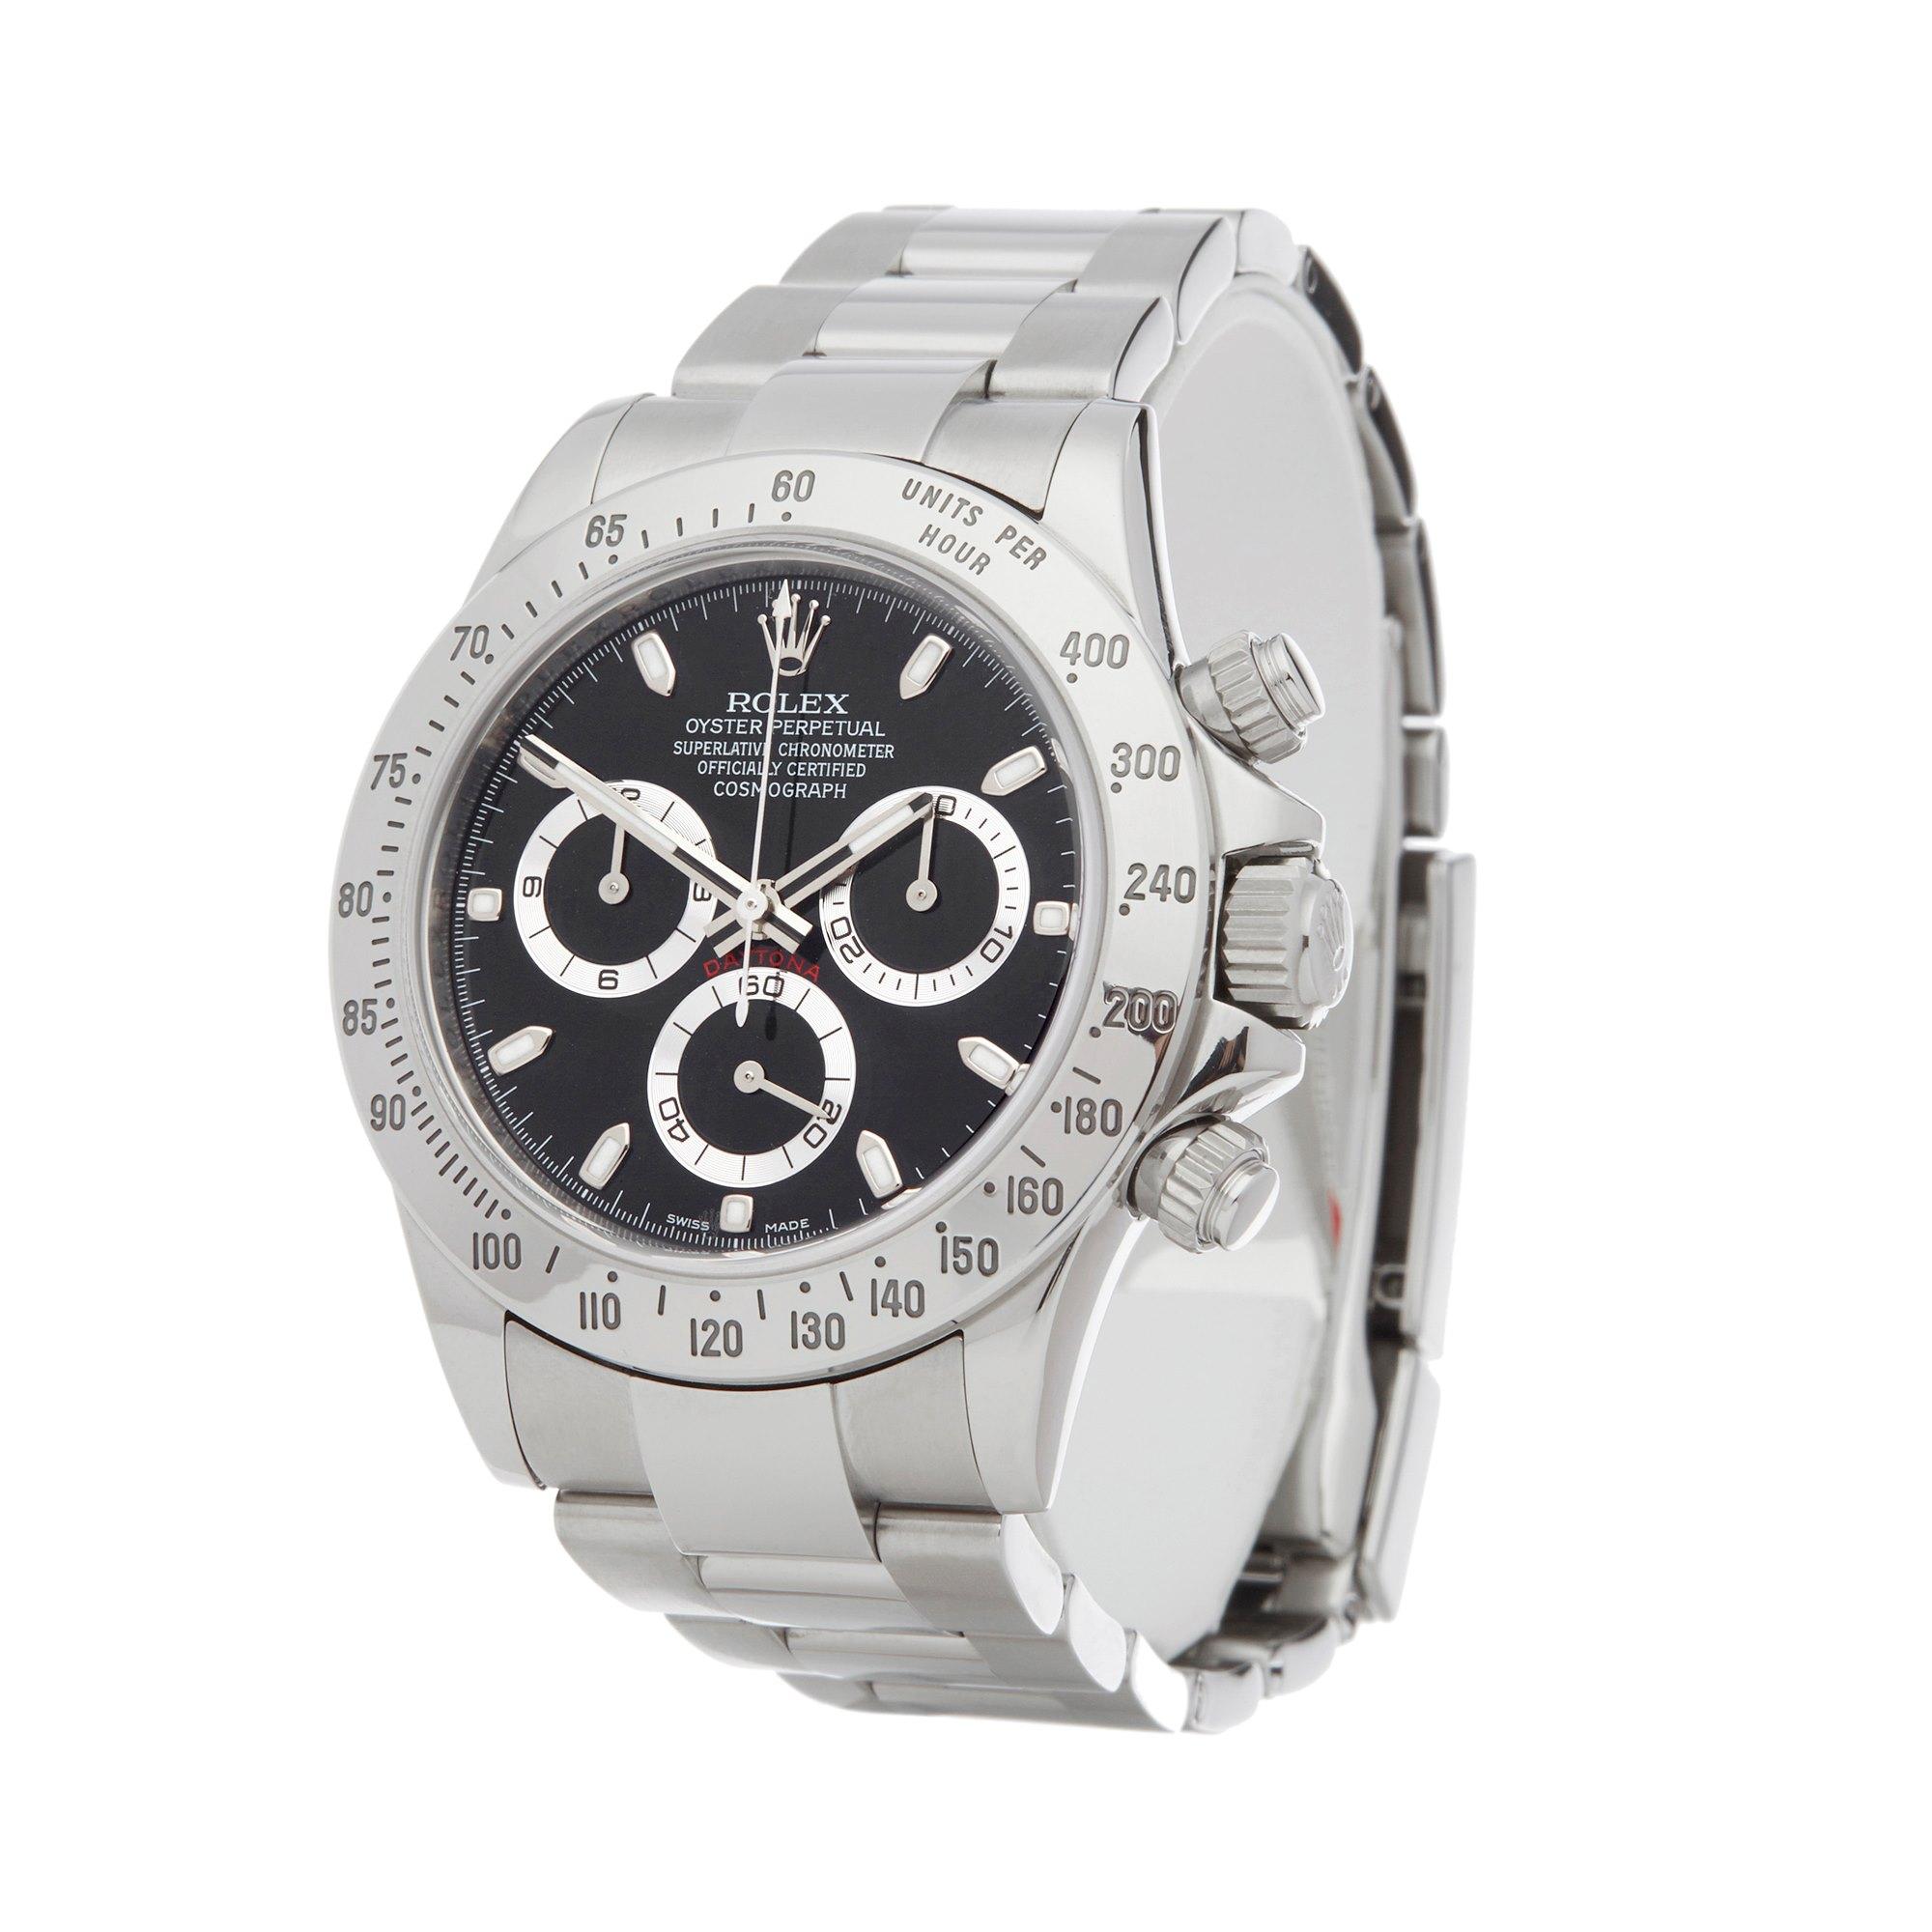 Xupes Reference: W007360
Manufacturer: Rolex
Model: Daytona
Model Variant: 
Model Number: 116520
Age: 07-07-2017
Gender: Men
Complete With: Rolex Box, Manuals & Guarantee
Dial: Black Baton
Glass: Sapphire Crystal
Case Size: 40mm
Case Material: